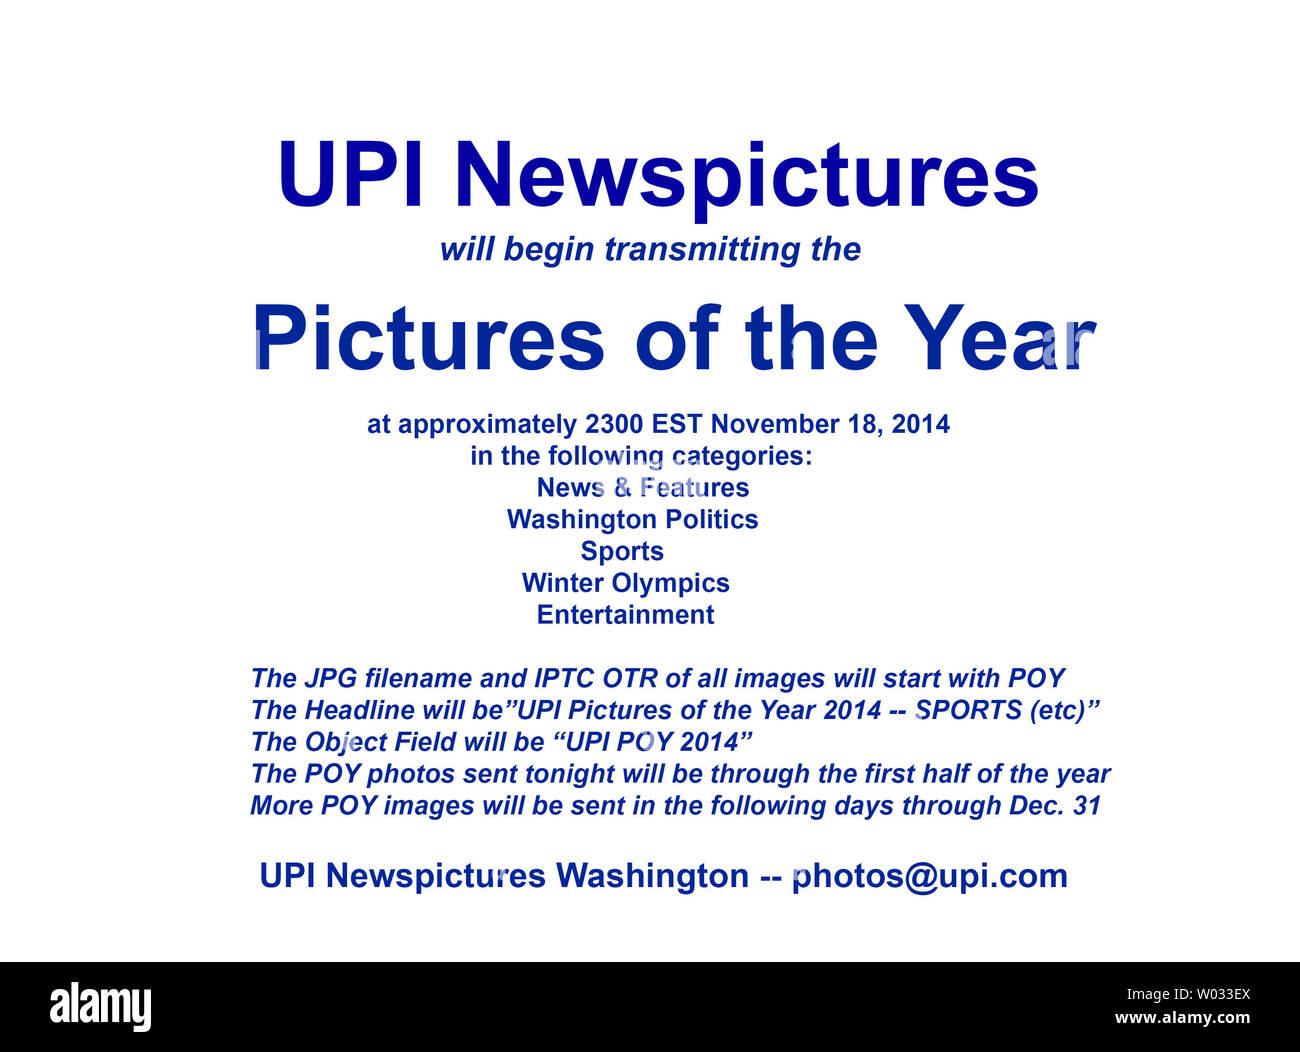 UPI Newspictures will being transmitting the 2014 Pictures of the Year on Tuesday, November 18, 2014 t approximately 2300 EST (0400GMT) in the following categories:  News & Features, Washington Politics, Sports, Winter Olympics, and Entertainment.  The images transmitted tonight will encompass the first half of the year and more images will move in the coming days through the end of the year. The JPG filename and IPTC OTR of all images will start with POY.  The Headline will be 'UPI Pictures of the Year 2014 - Sports (and so on).  The Object Field will be 'UPI POY 2014'.    UPI Washington,  ph Stock Photo